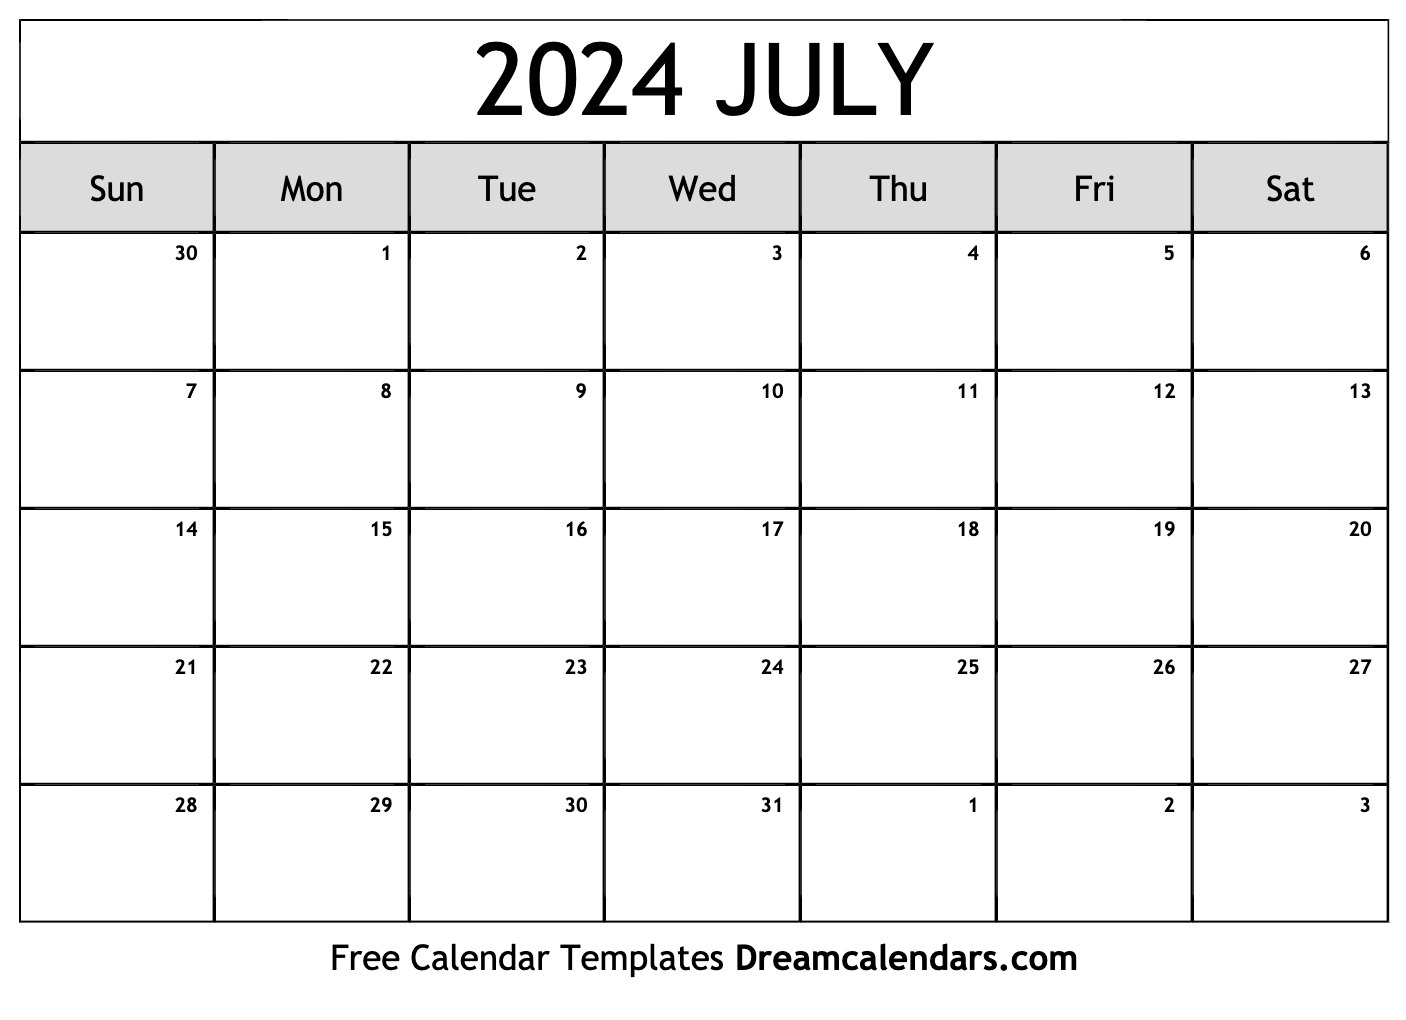 July 2024 Calendar - Free Printable With Holidays And Observances with July 10 2024 Calendar